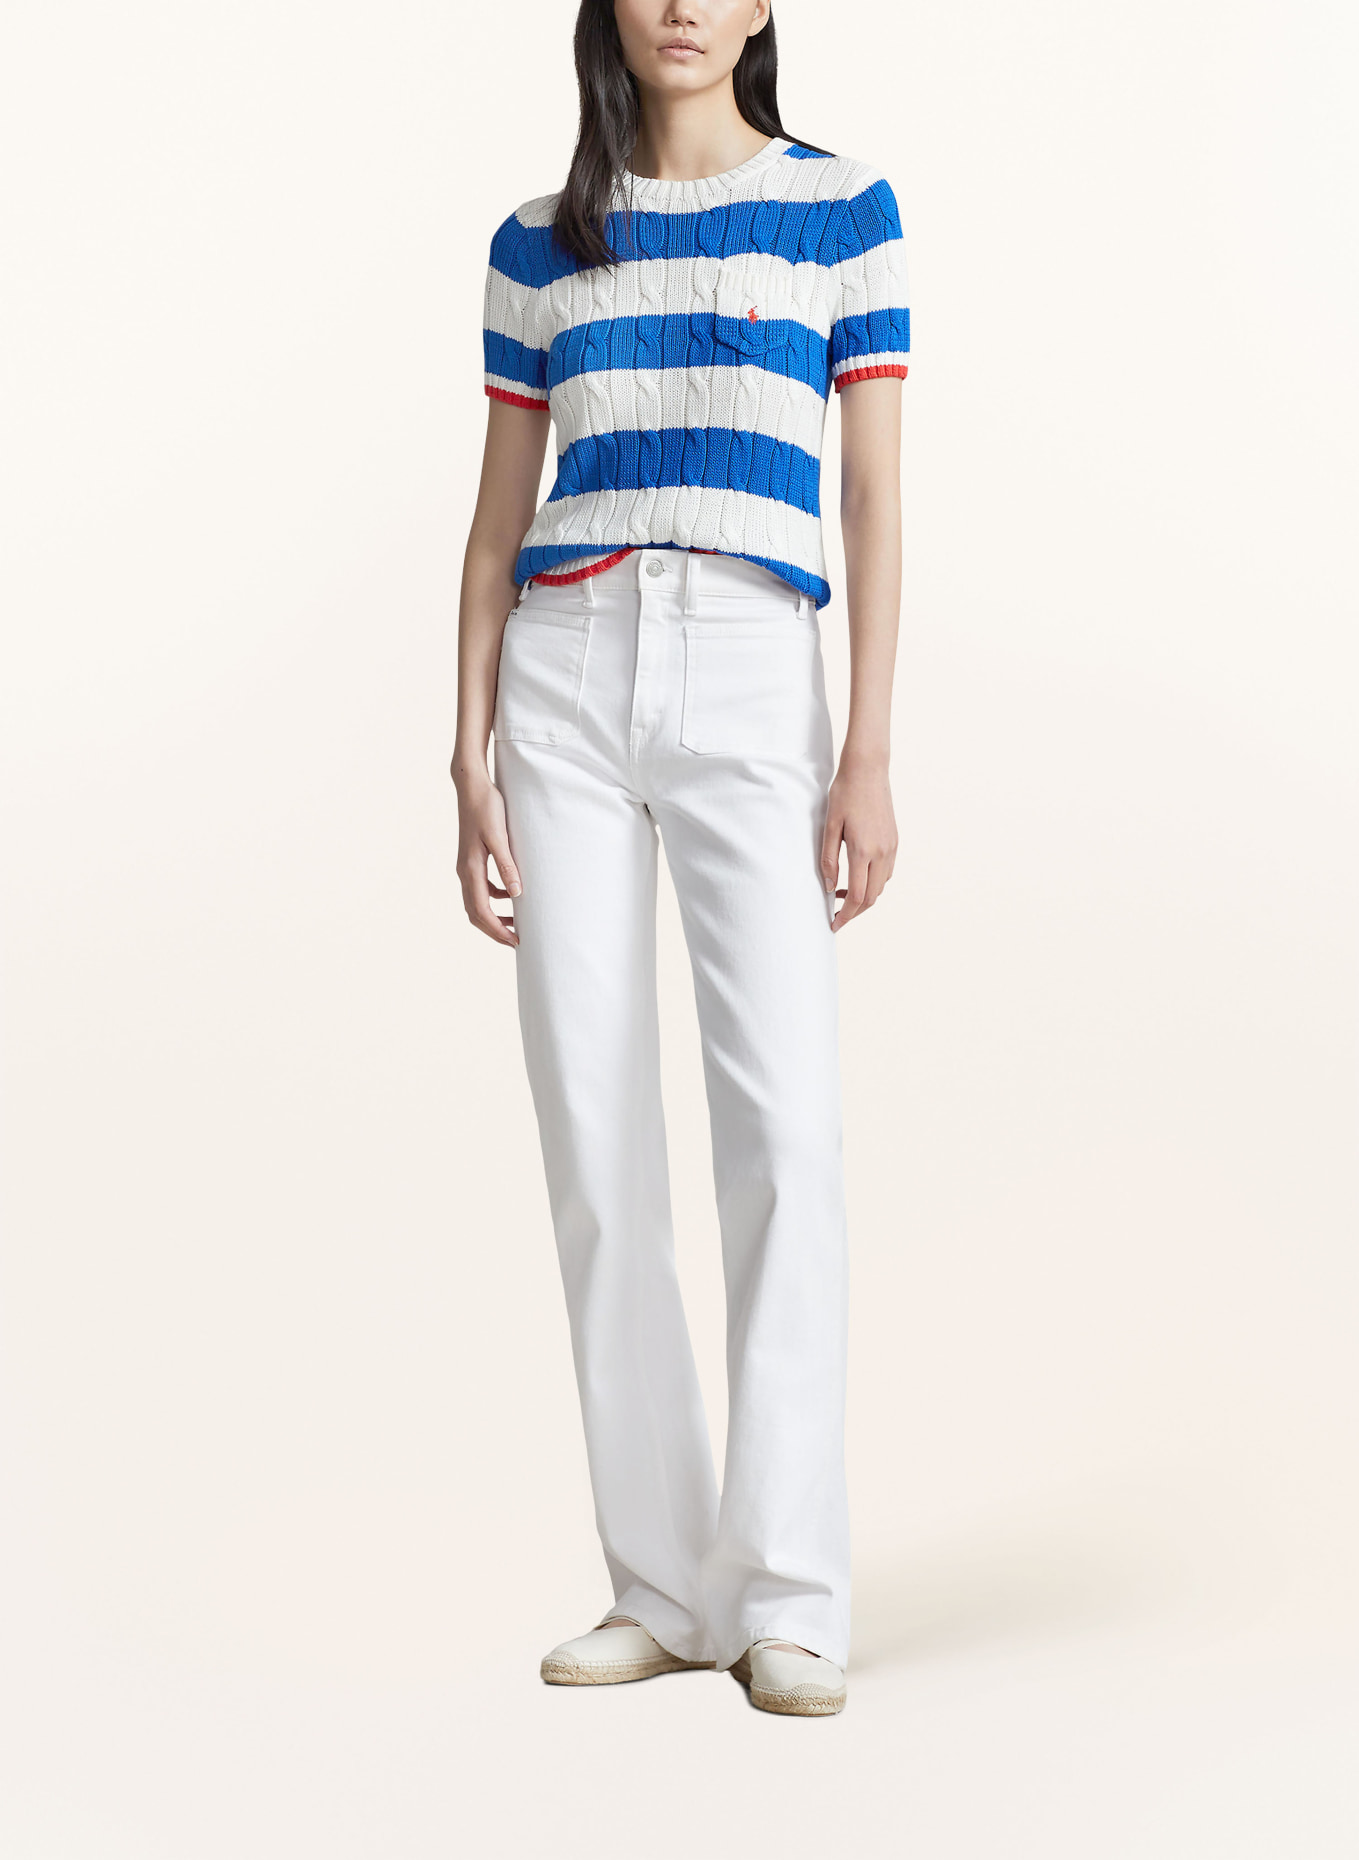 POLO RALPH LAUREN Knit shirt, Color: WHITE/ BLUE/ RED (Image 2)